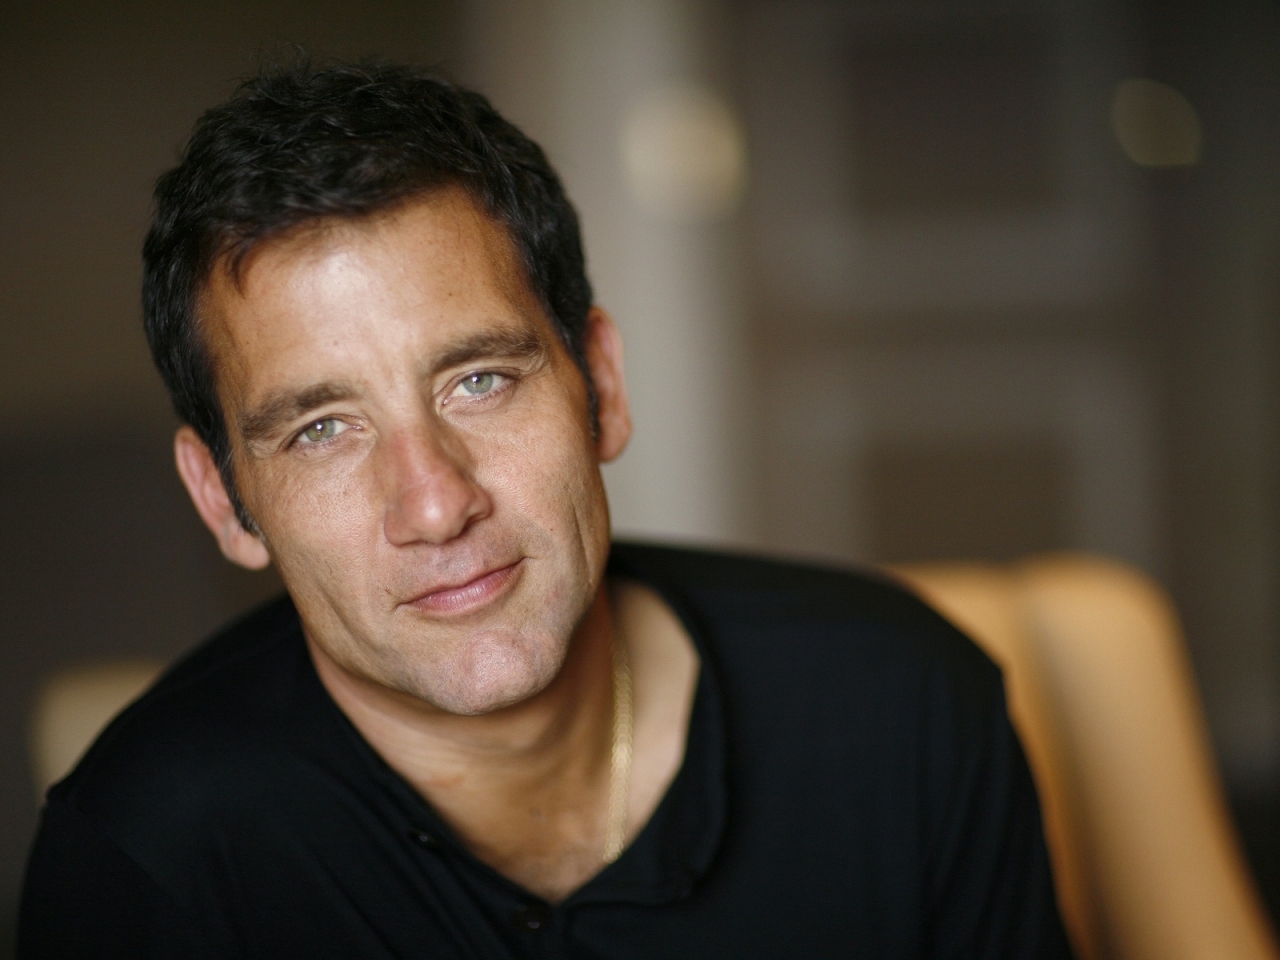 Clive Owen Smile for 1280 x 960 resolution